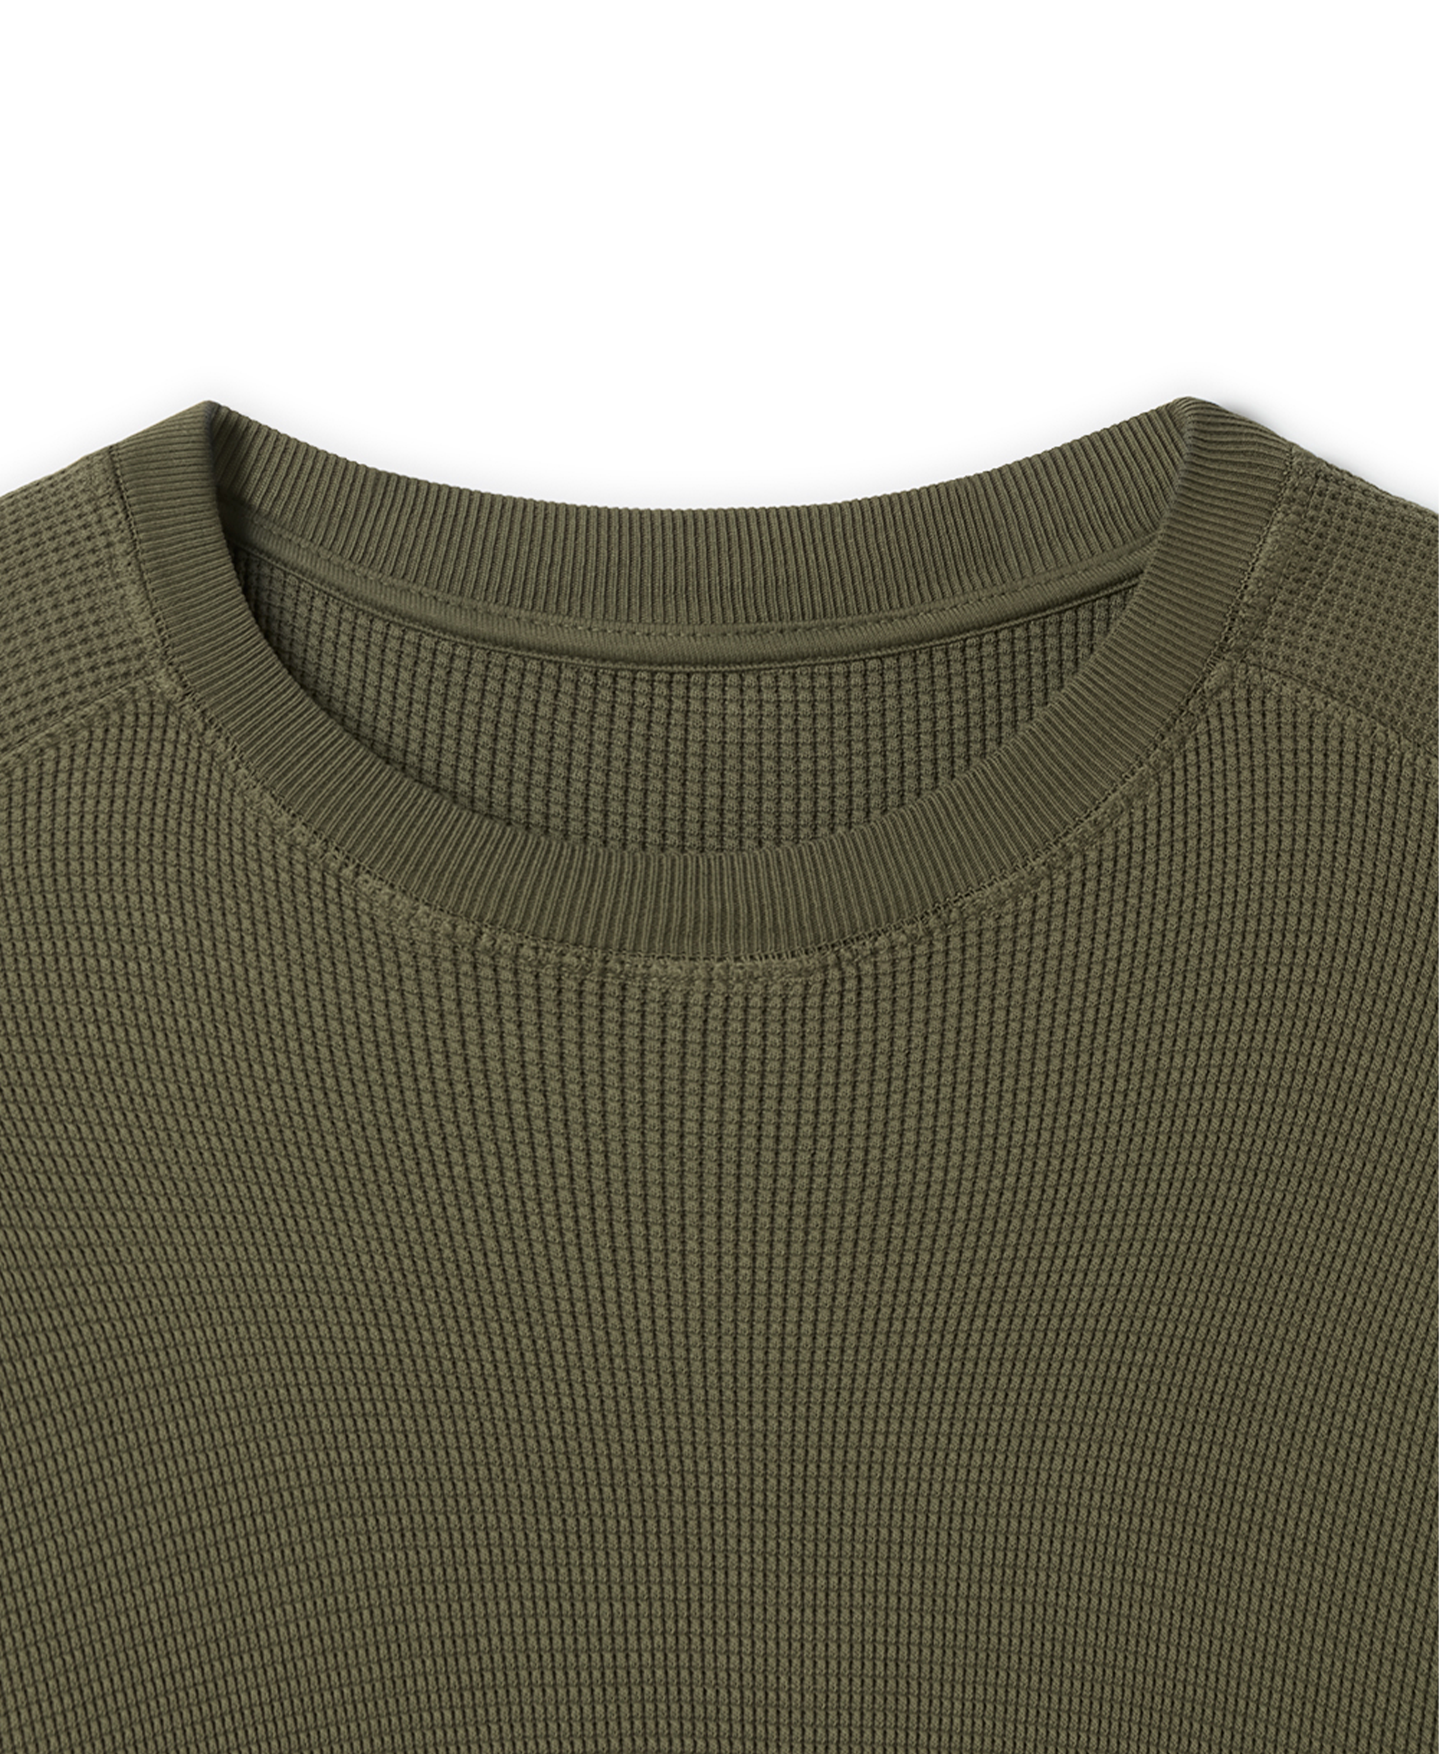 350 GSM 'Army Olive' Thermal Longsleeve